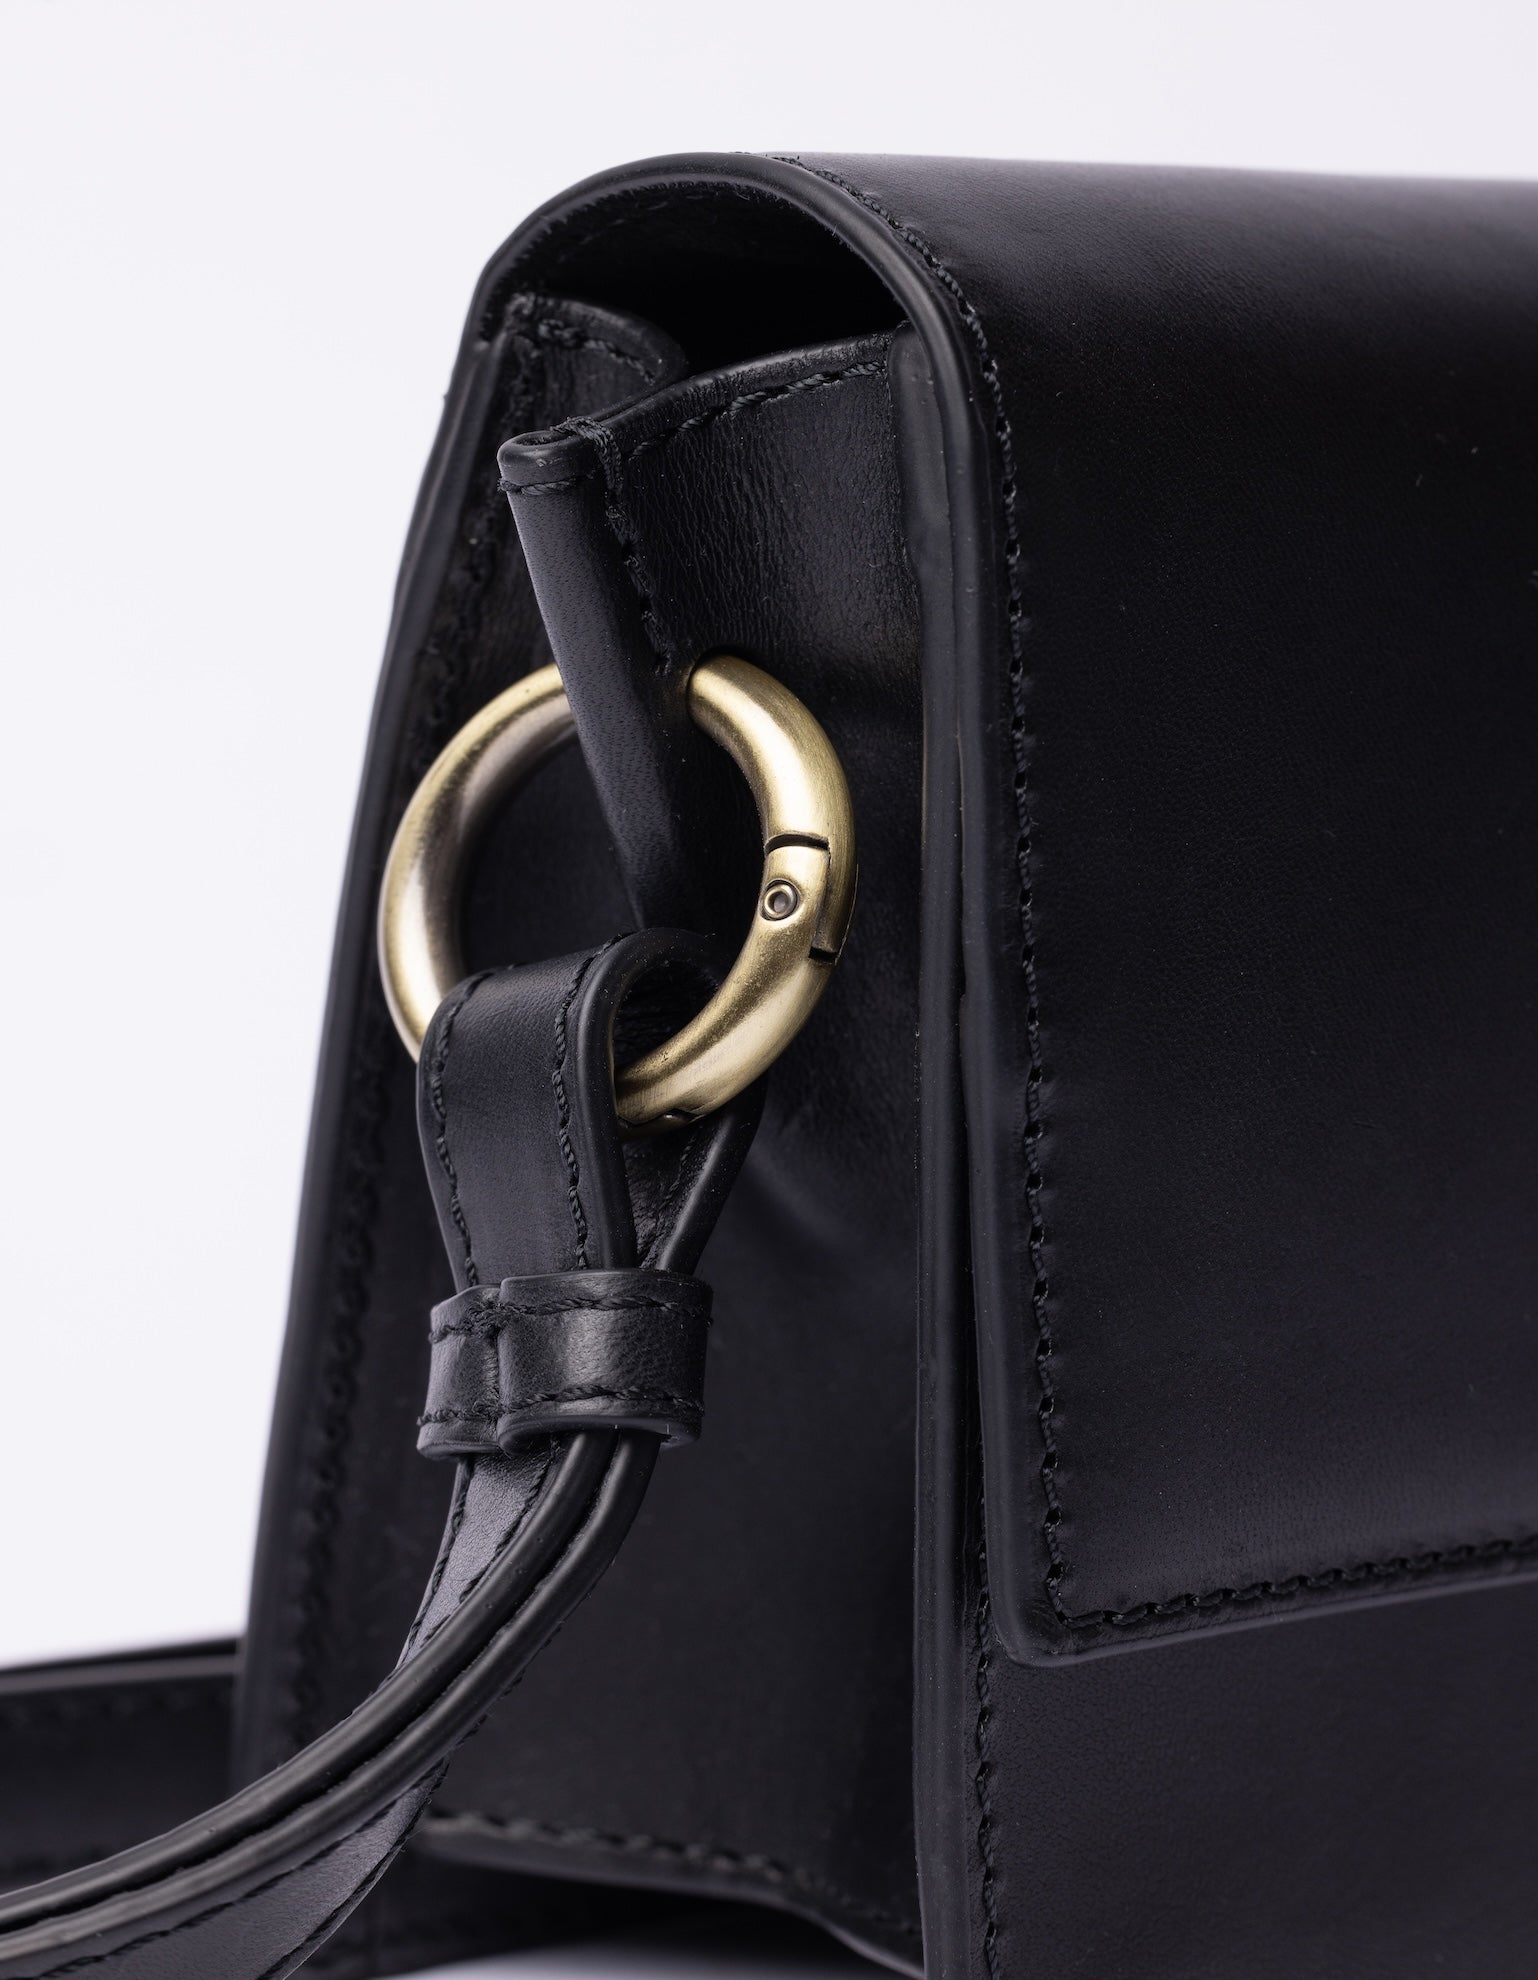 Stella in black classic leather. Close-up details.